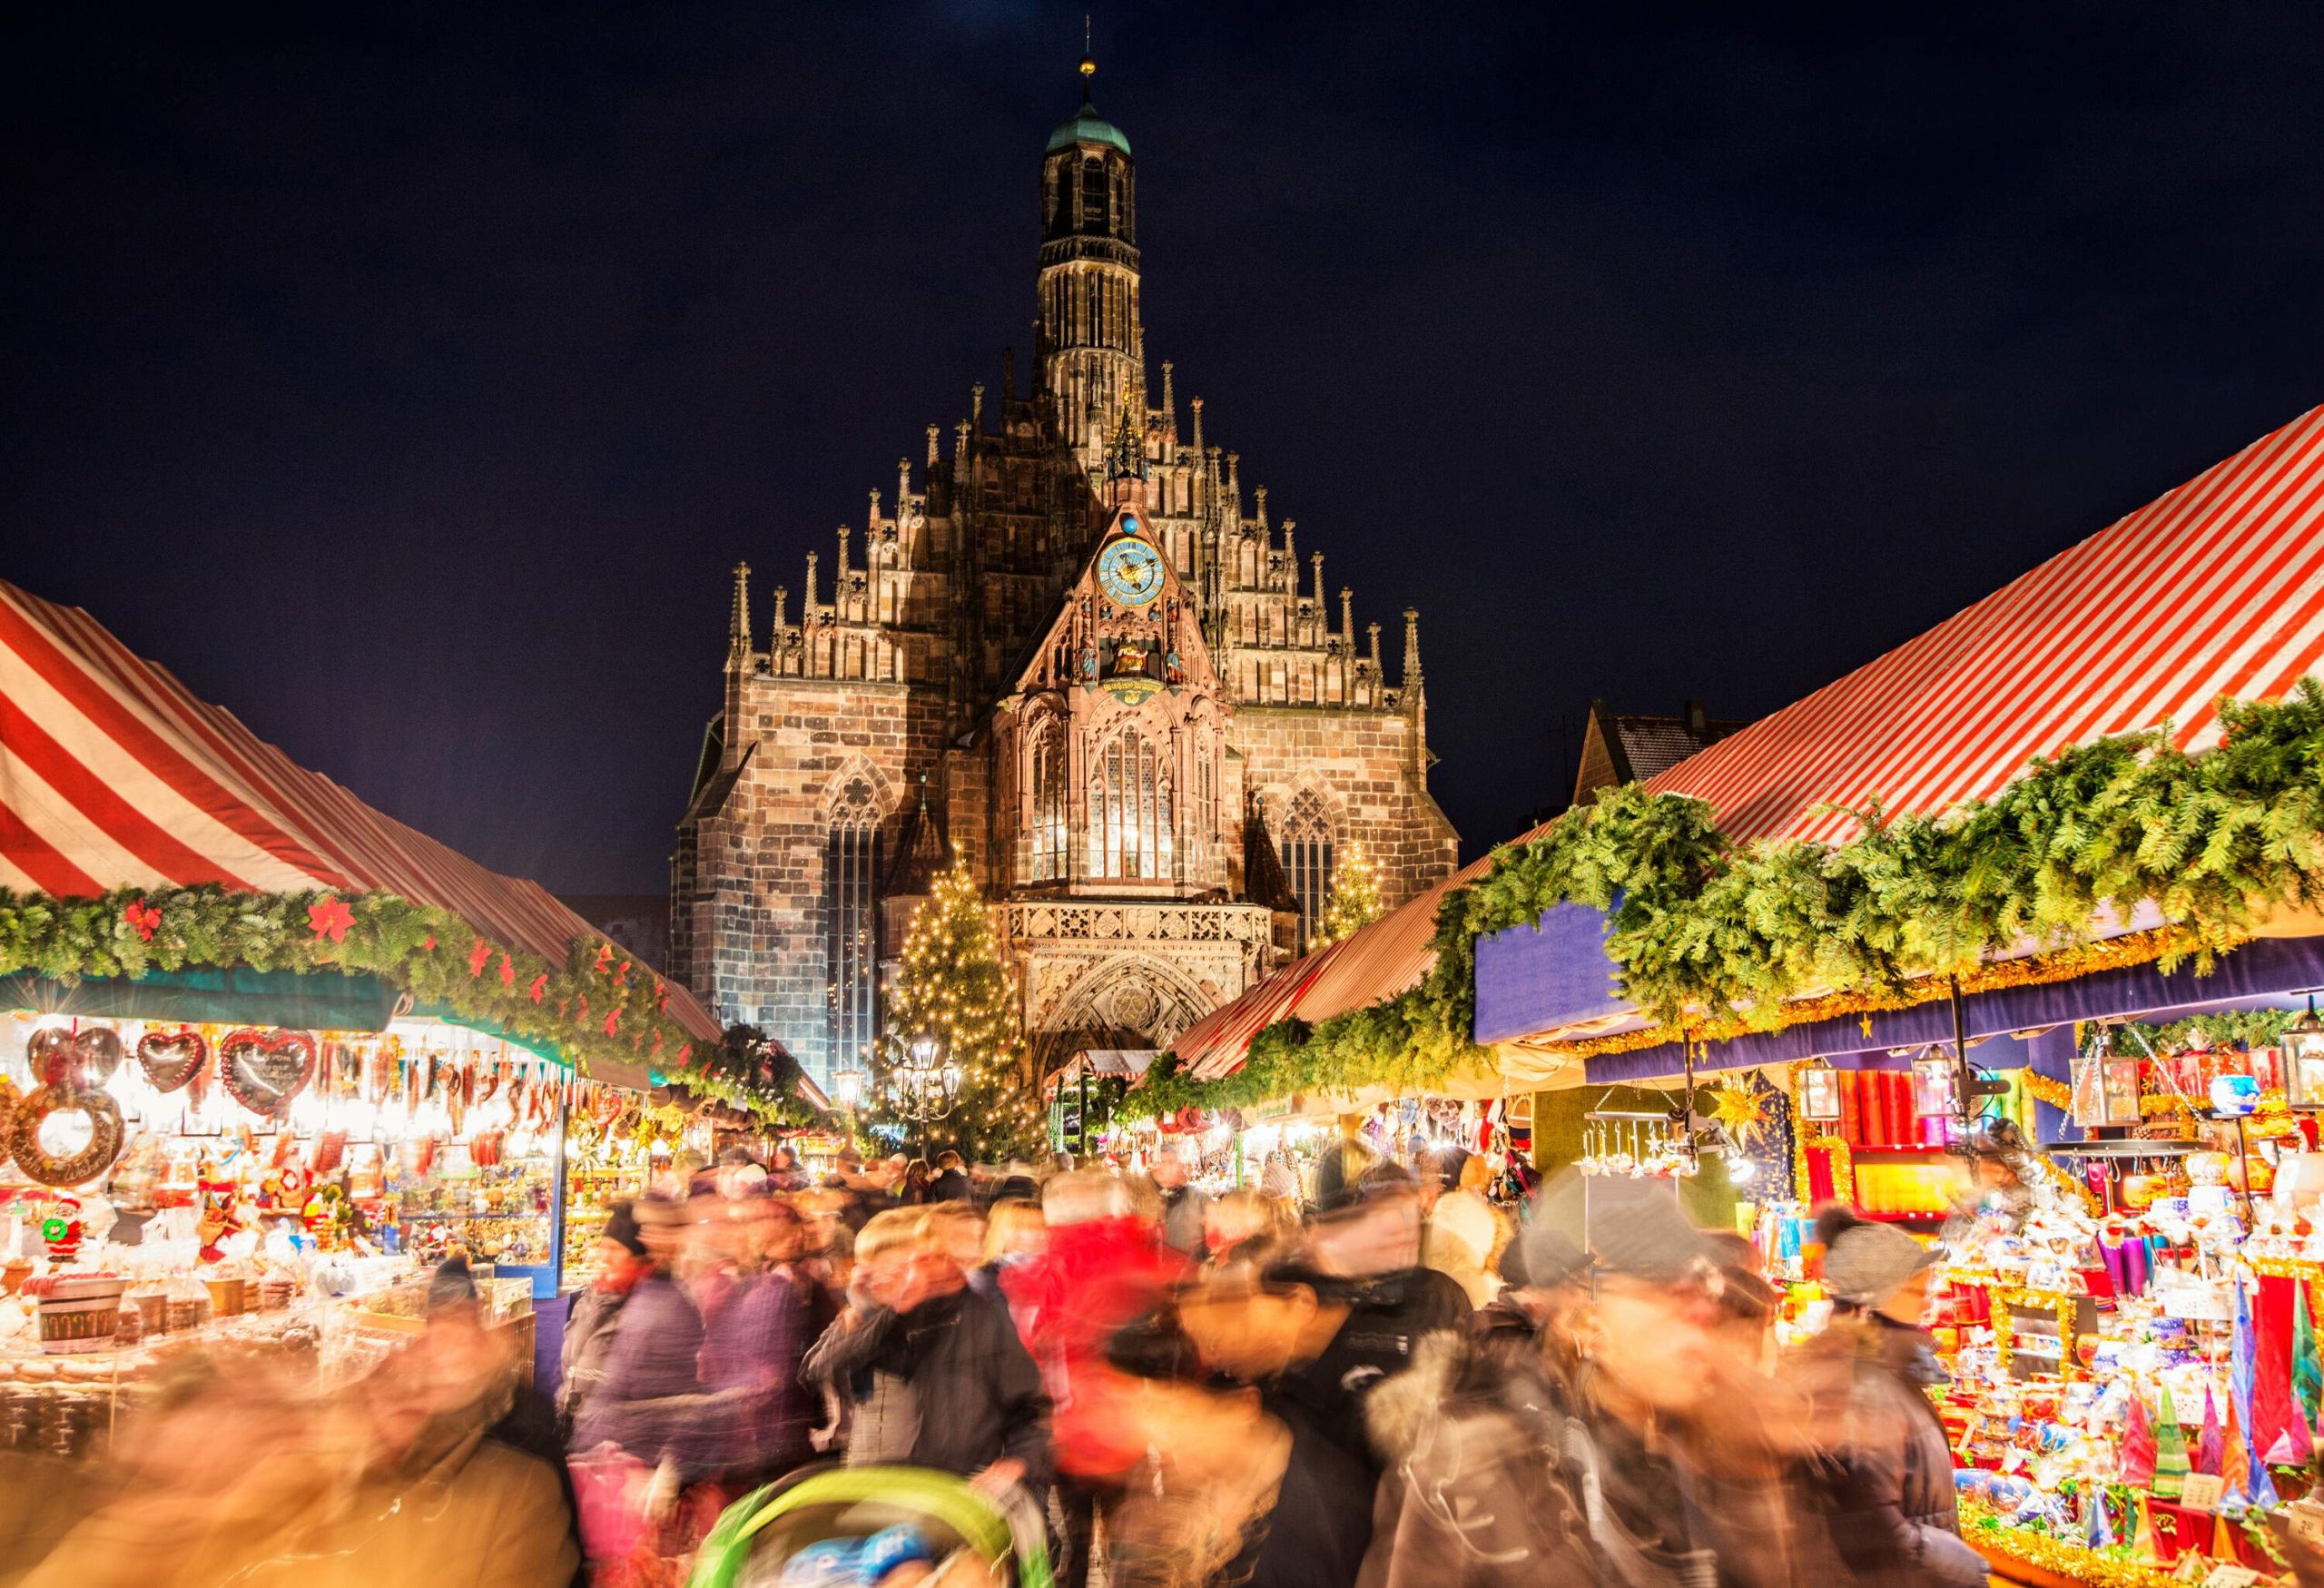 A brick Gothic church behind a crowd of people in motion, in a busy Christmas market at night with colourful illuminated Christmas decorations and food stalls. 